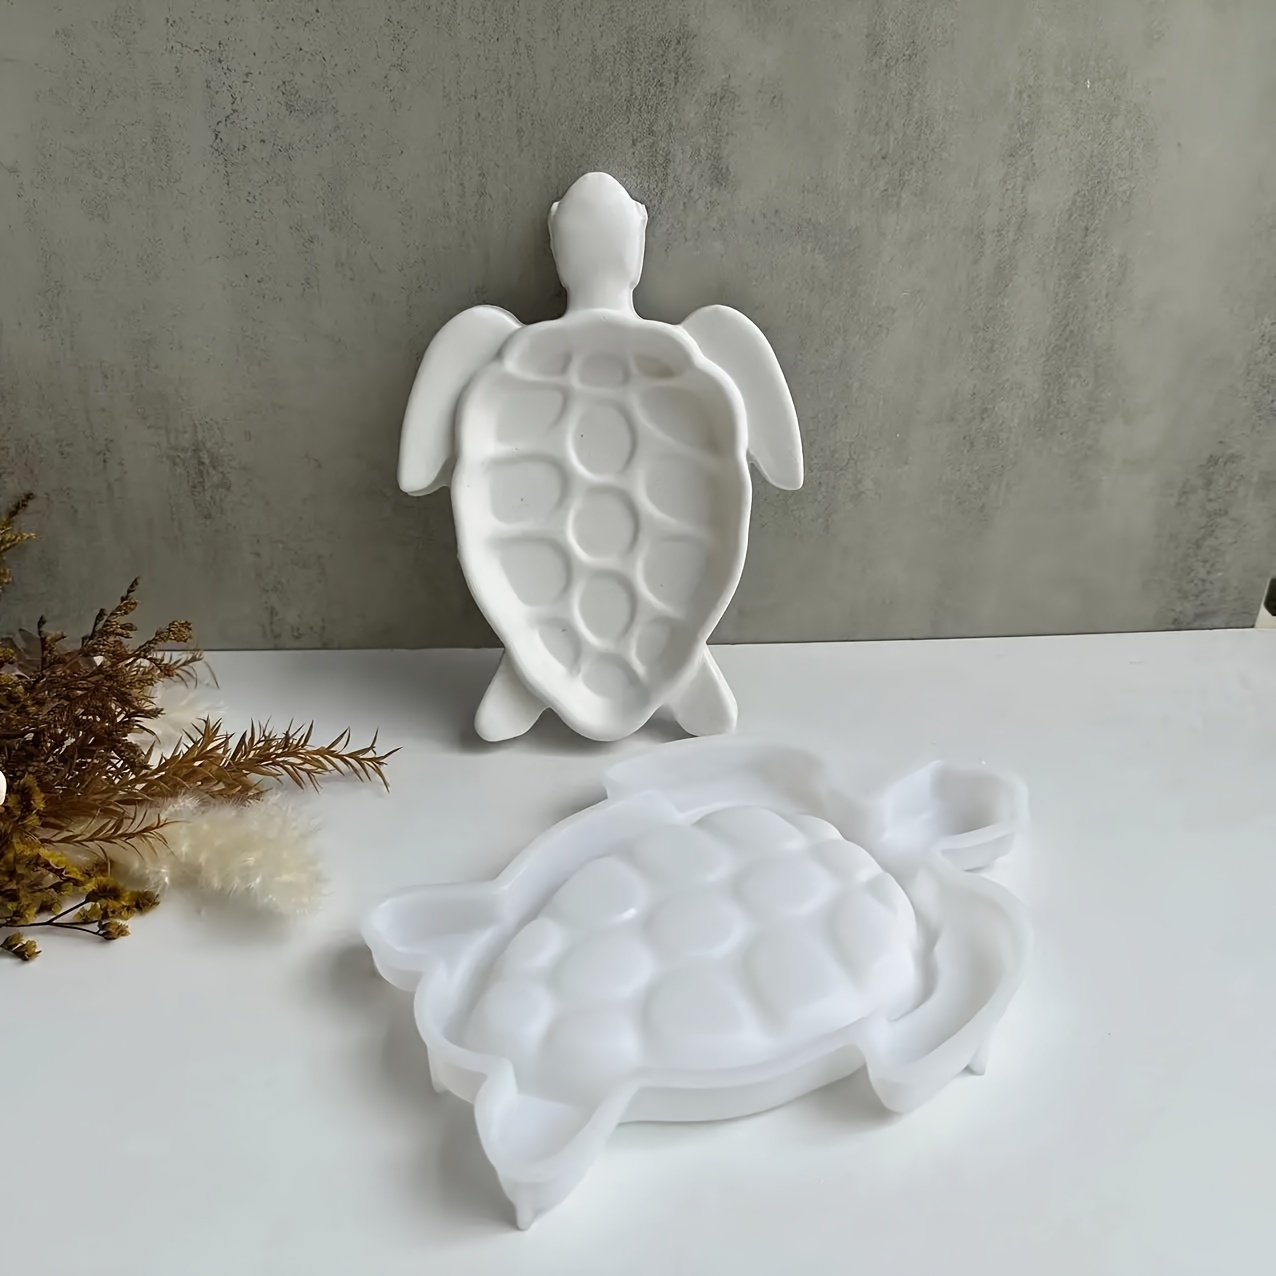 

Turtle Tray Silicone Mold Cushion Tray Diy Gypsum Clay Epoxy Ultraviolet Resin Mold, Cup Cushion Silicone Mold Home Decoration